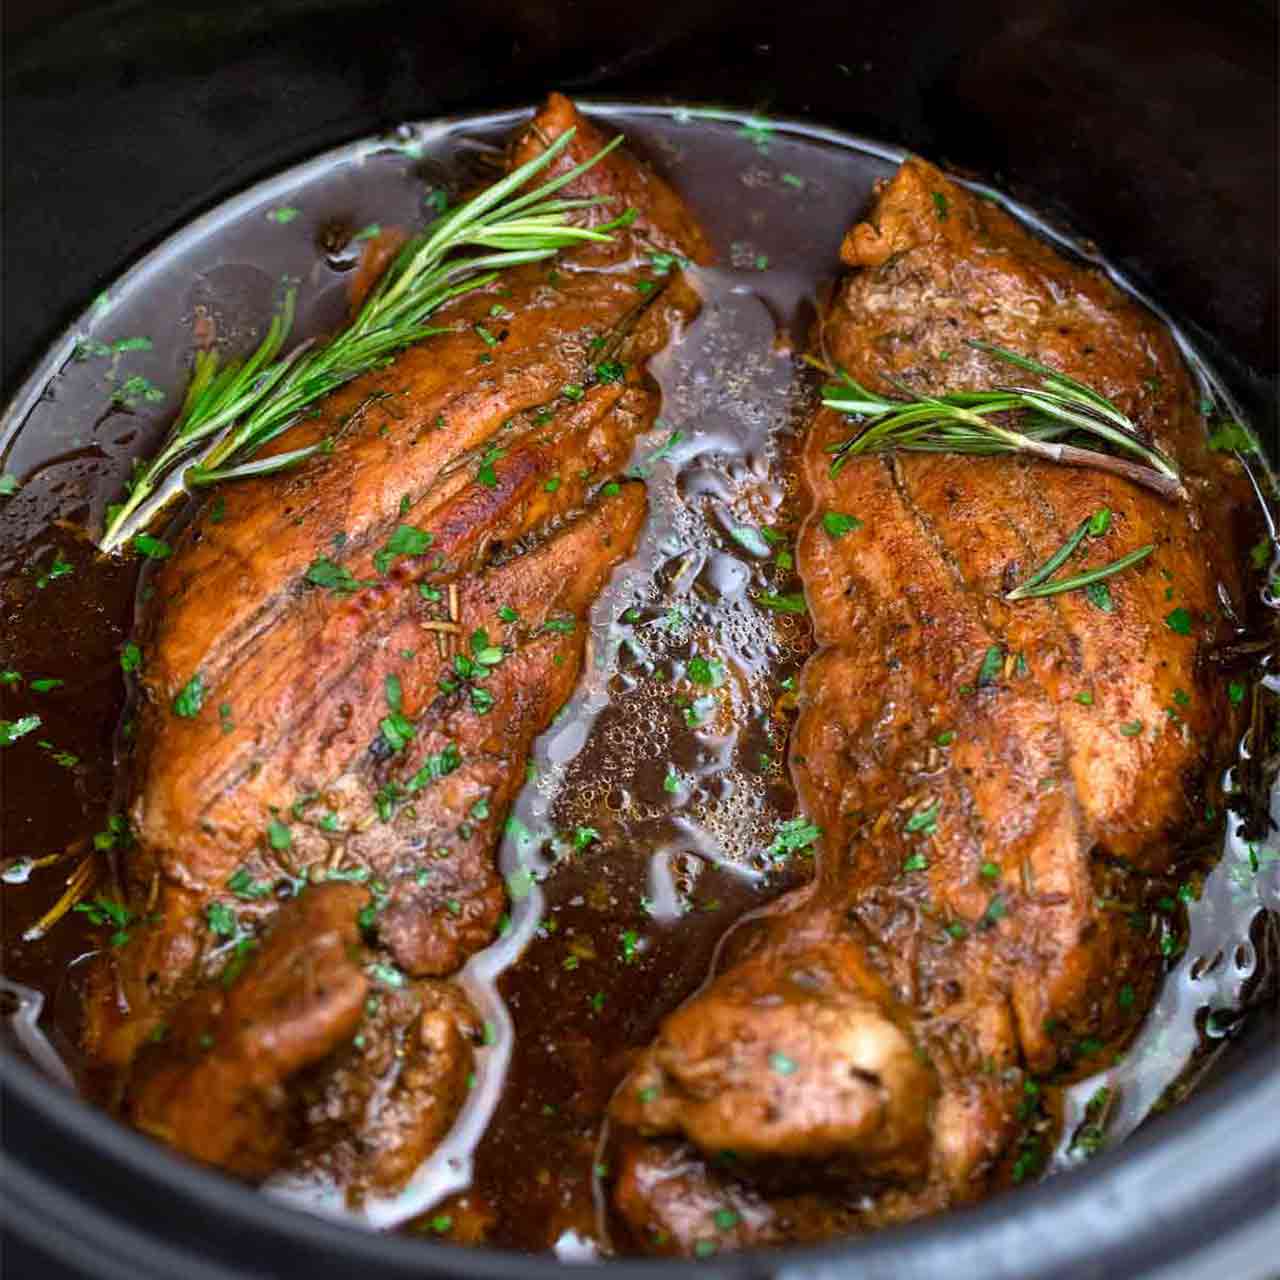 How To Cook Amazing Pork Loin In The Crock Pot Every Time